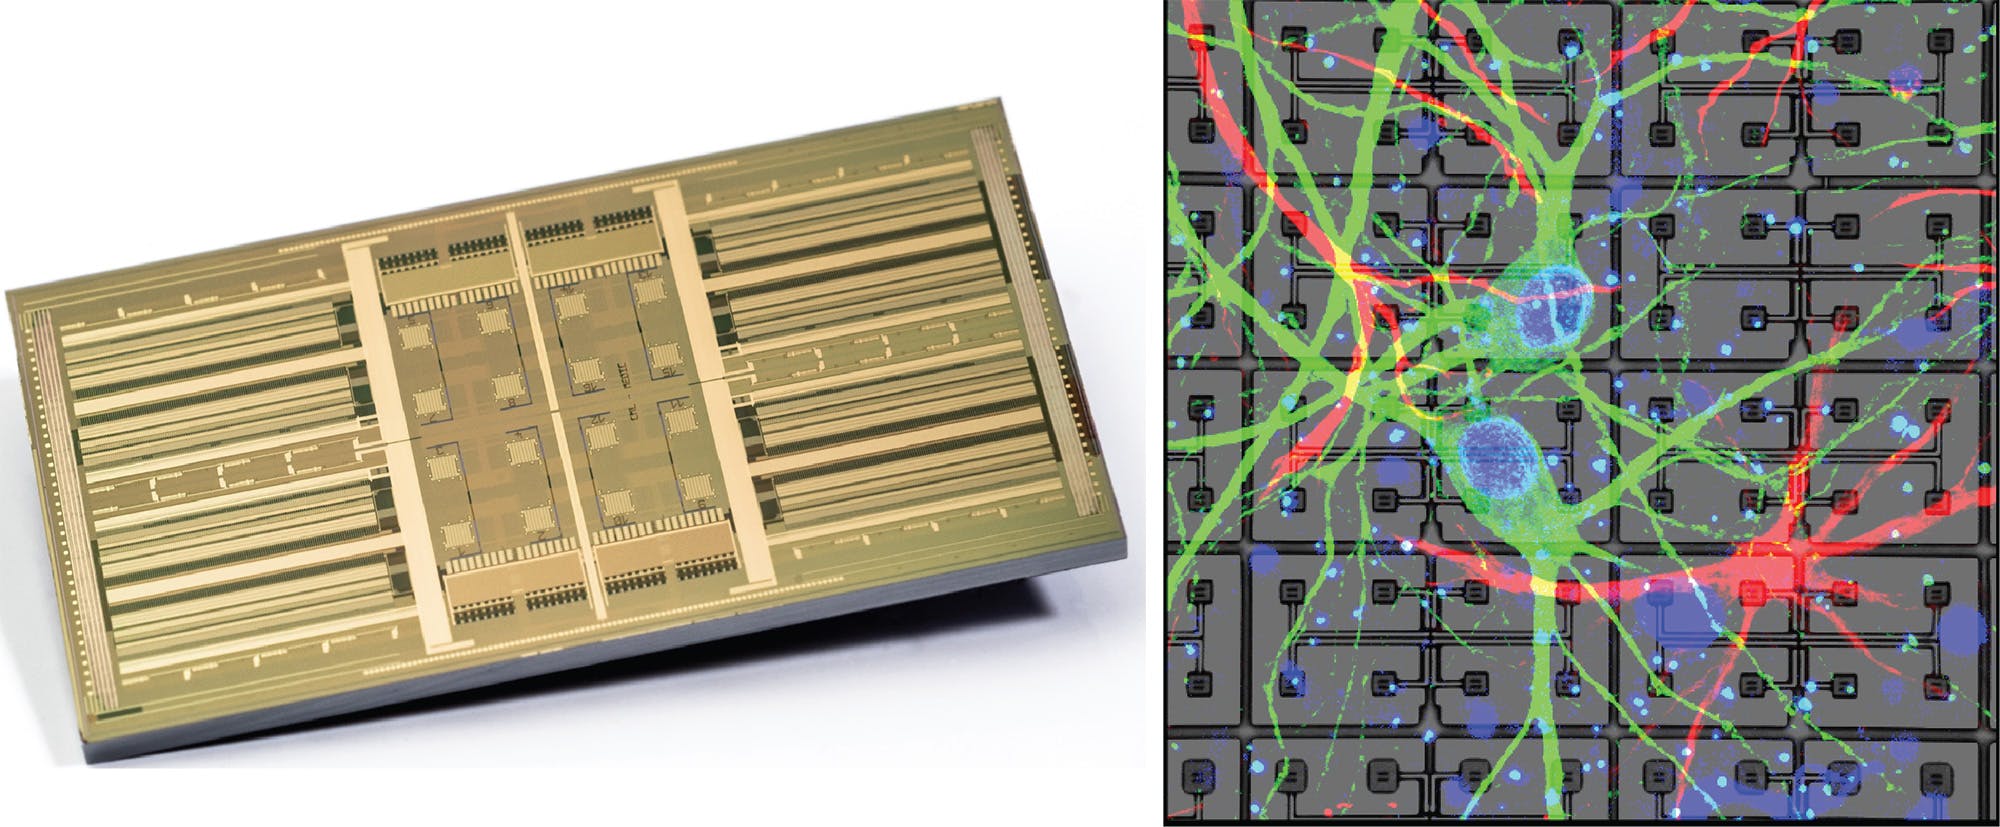 Left: imec’s high-density MEA with over 16.000 electrodes. Right: neurons grown on the chip.